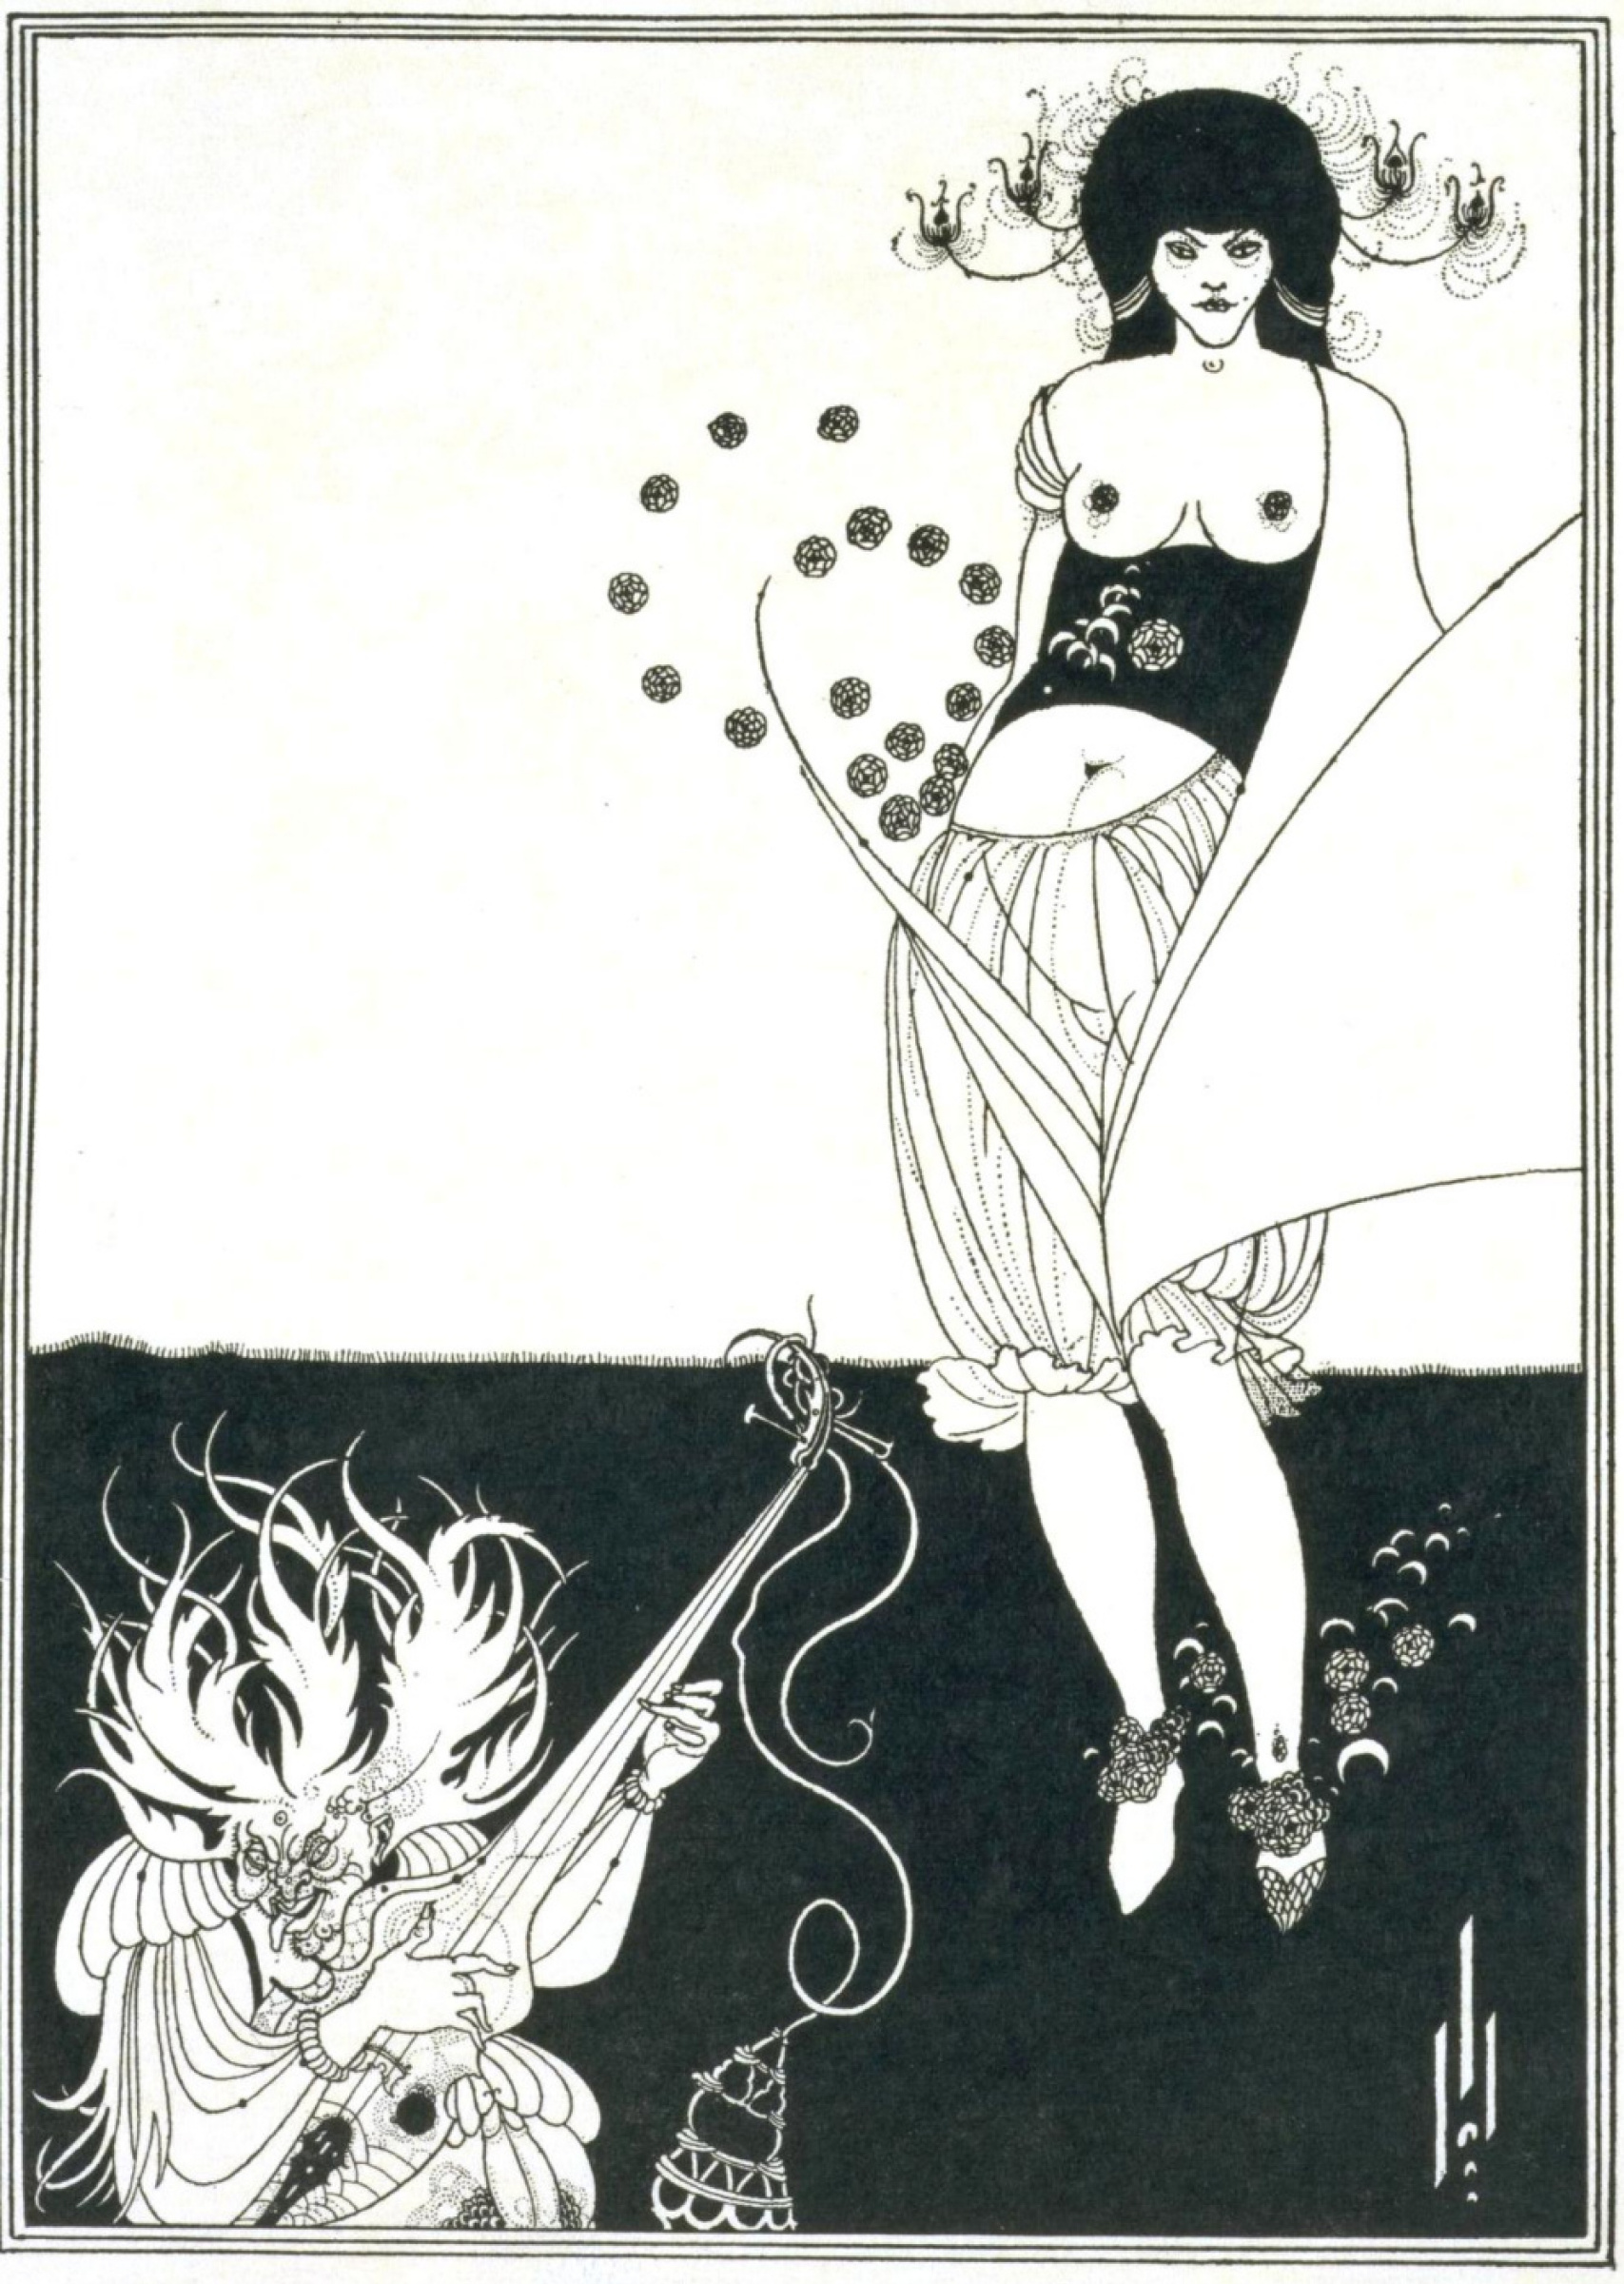 Aubrey Beardsley, A Stomach Dance, 1892, private collection. 